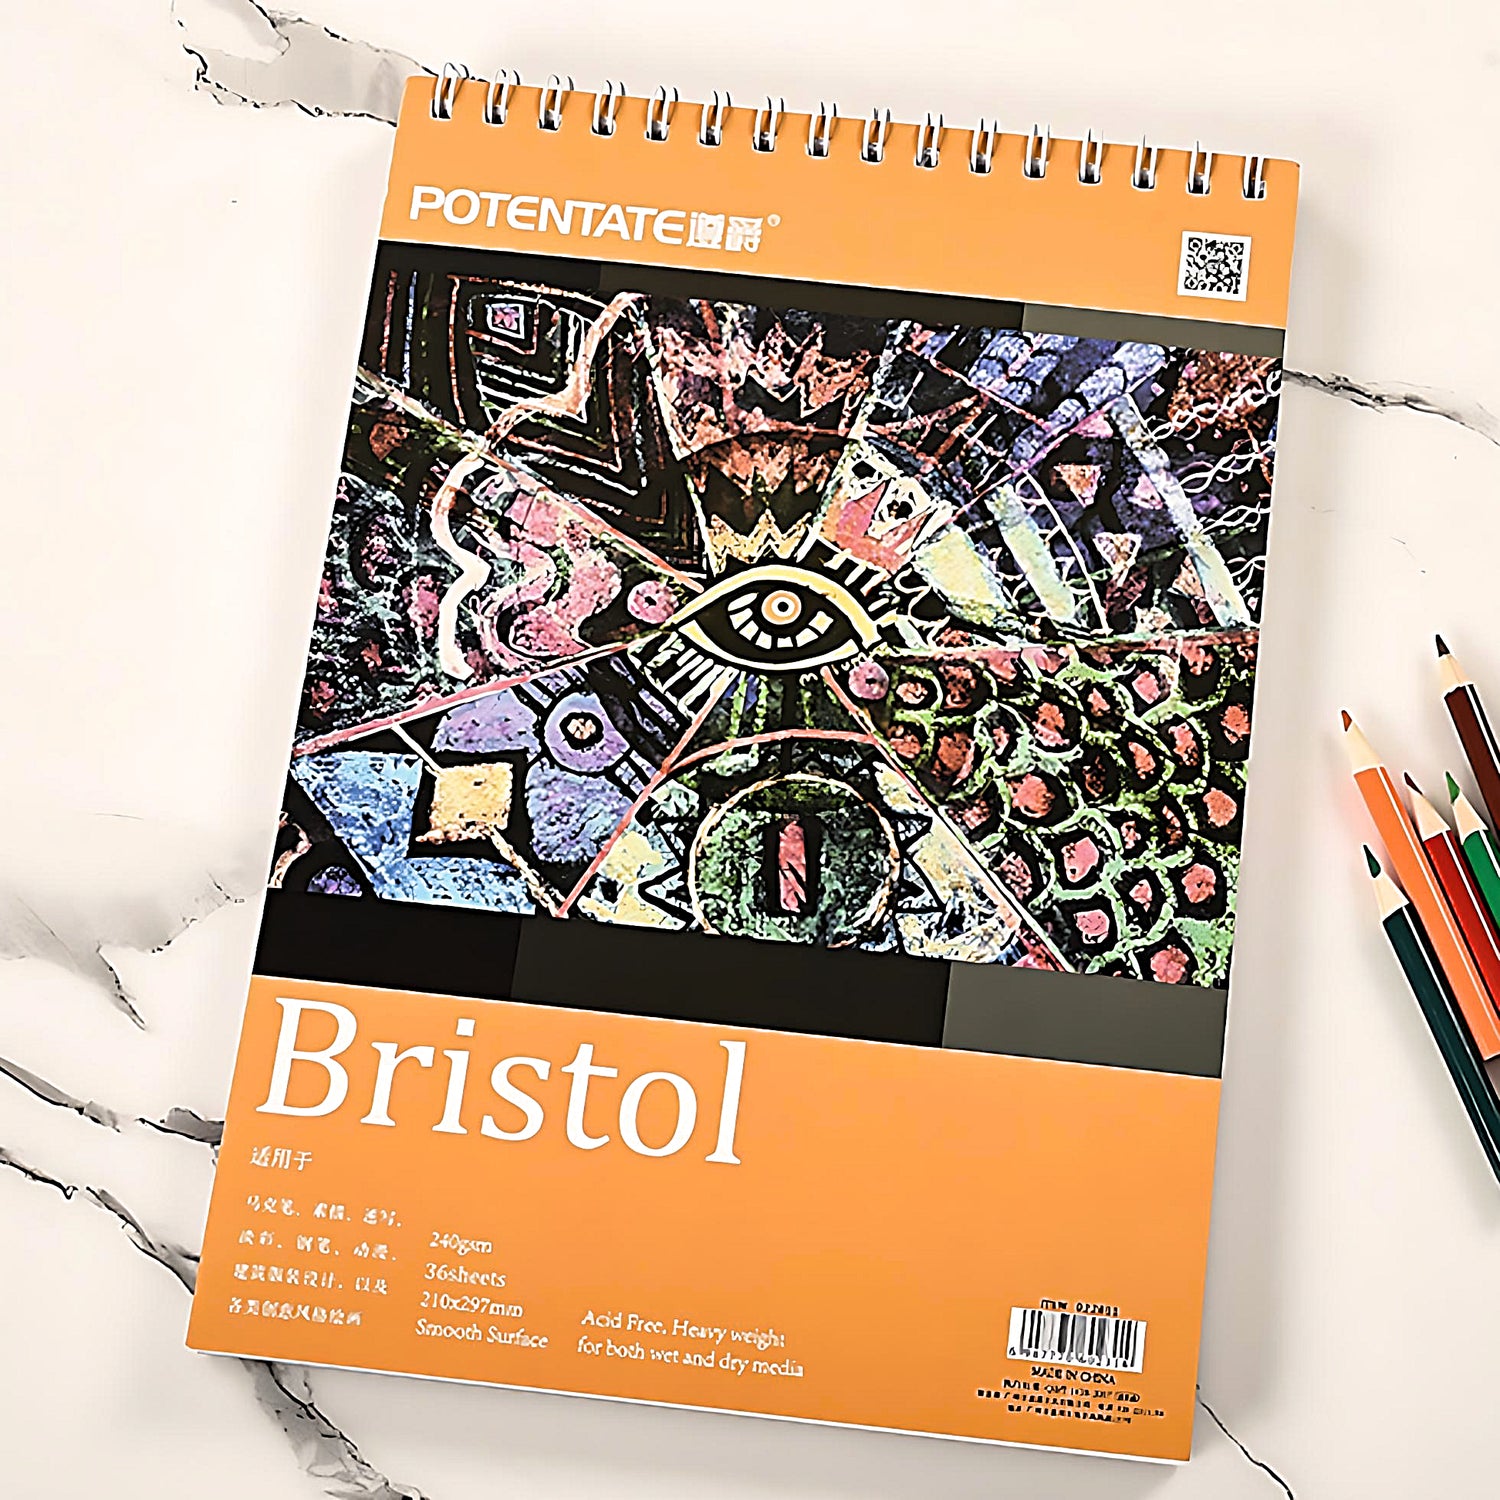 a Potentate Bristol sketchbook on a marble table